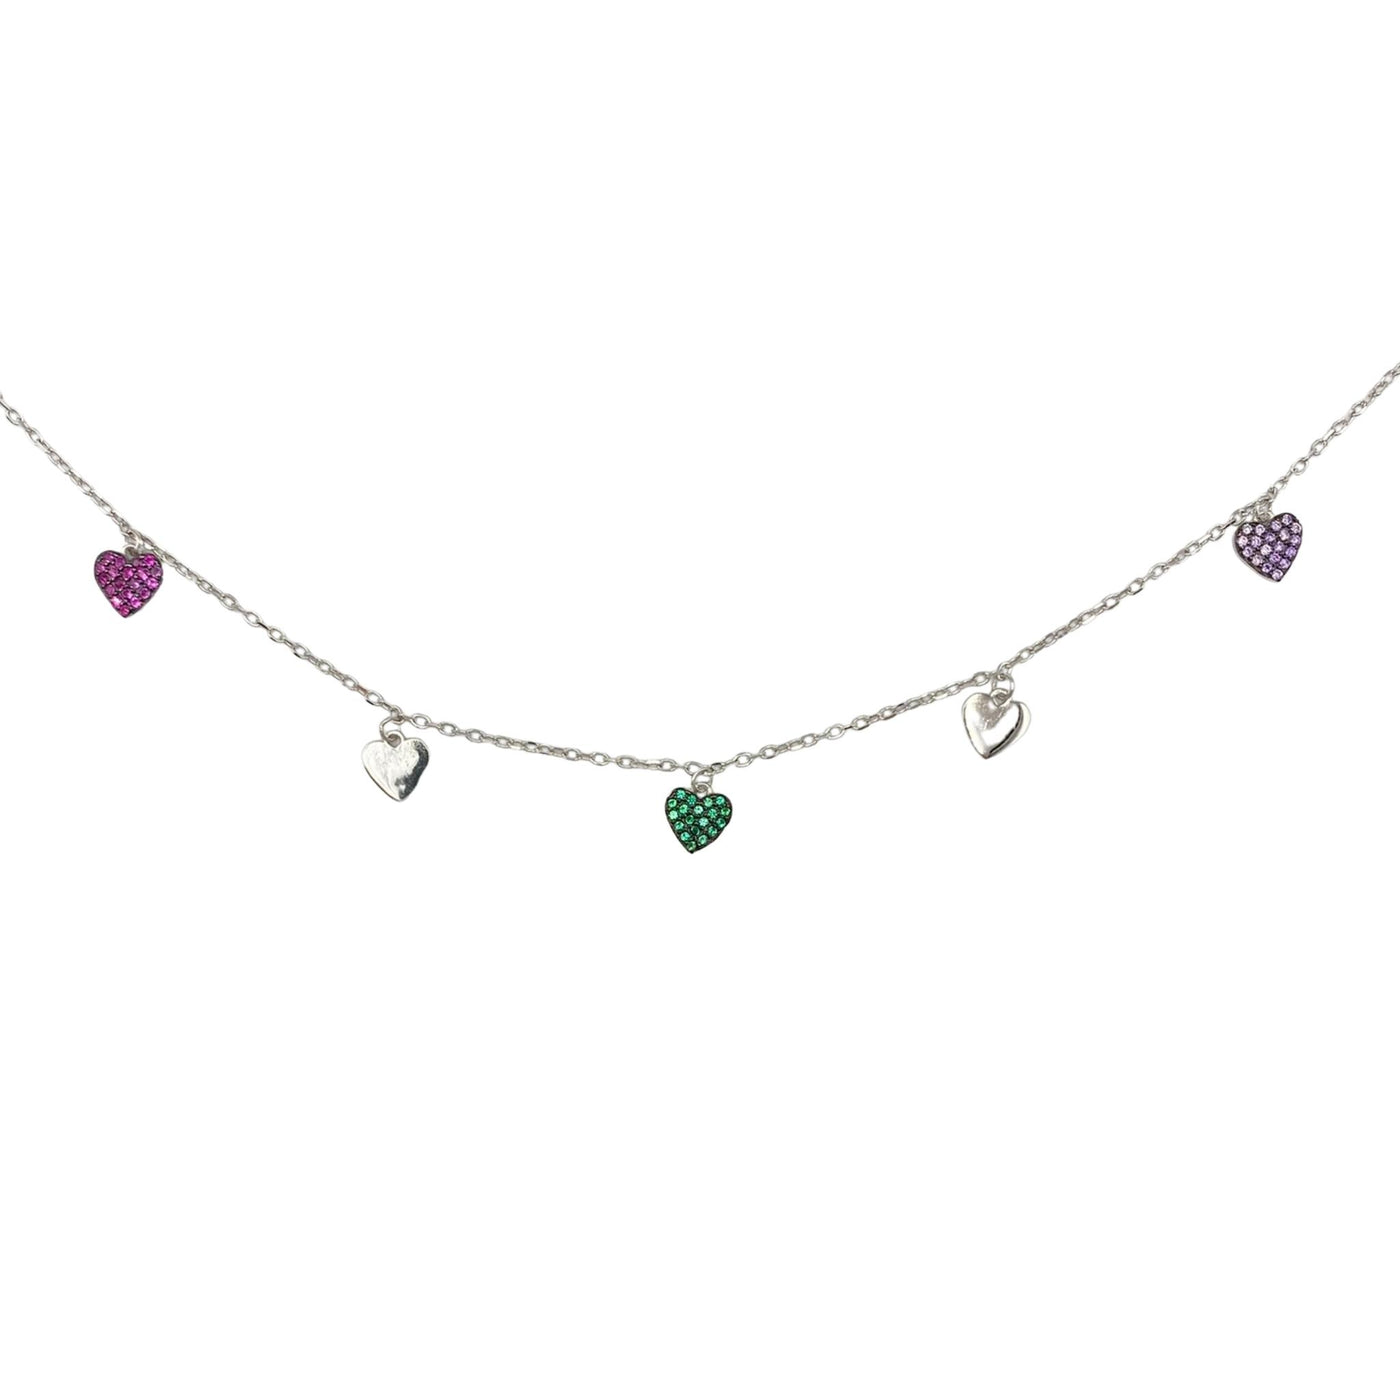 Silver hearts charms necklace